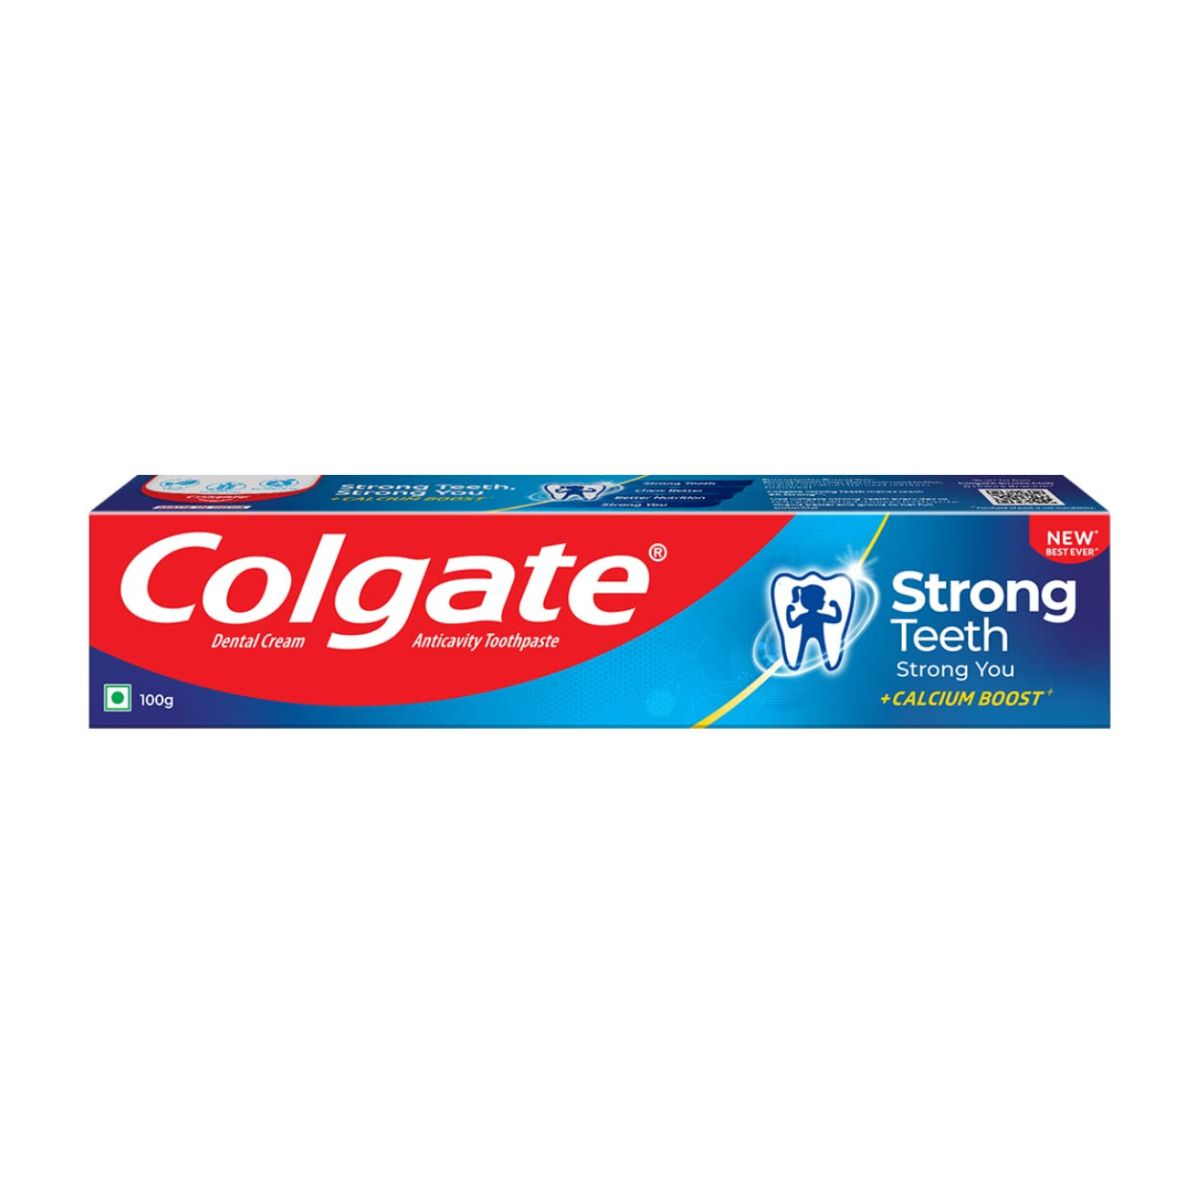 Colgate Anticavity Toothpaste - Strong Teeth + Calcium Boost - 100g + 15g